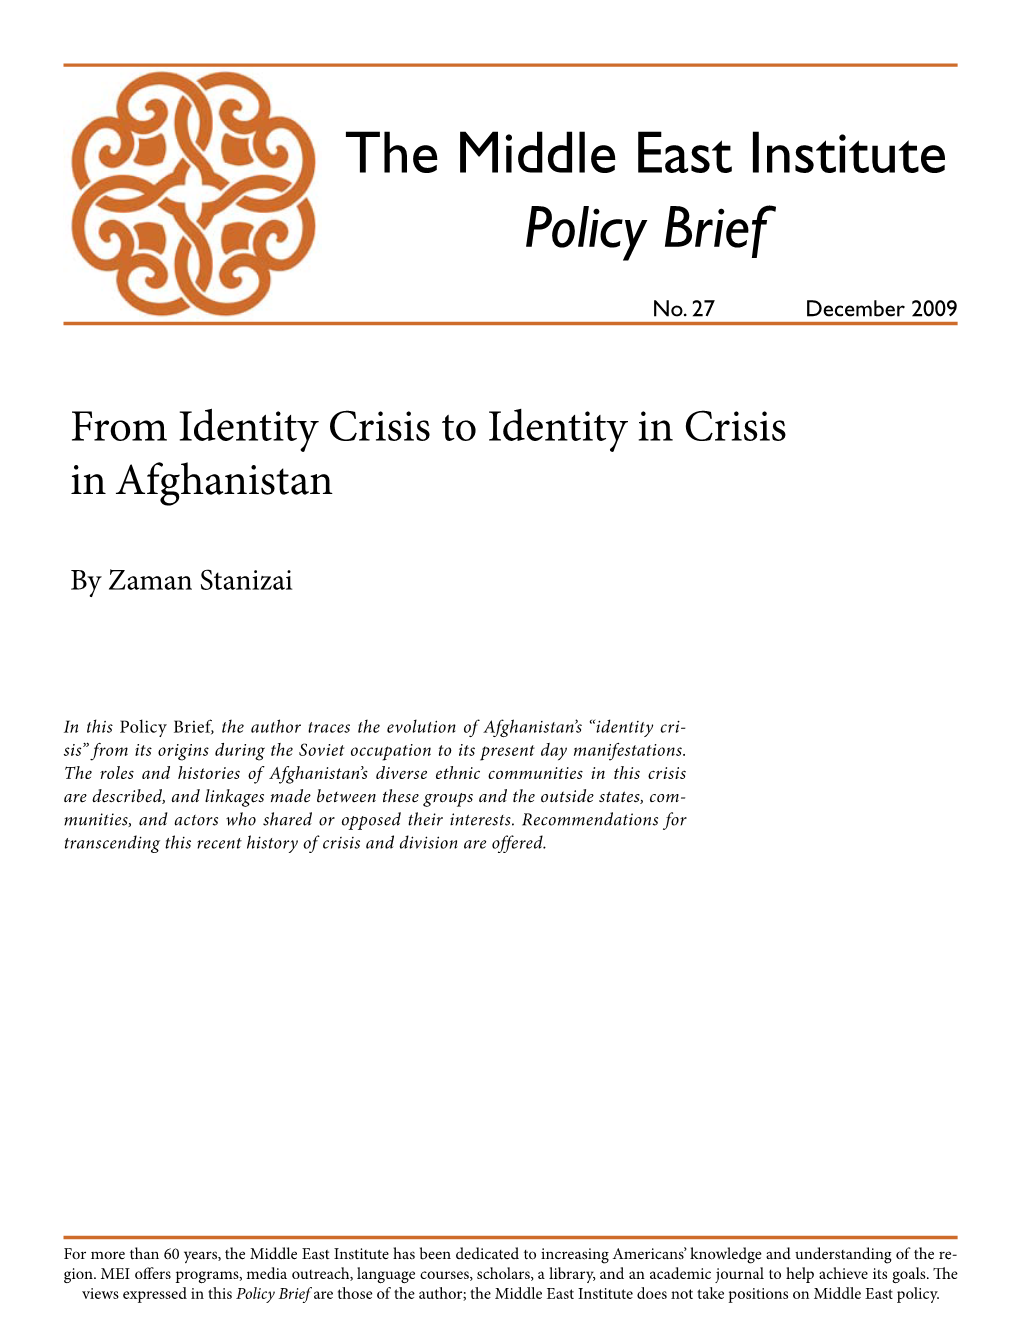 From Identity Crisis to Identity in Crisis in Afghanistan